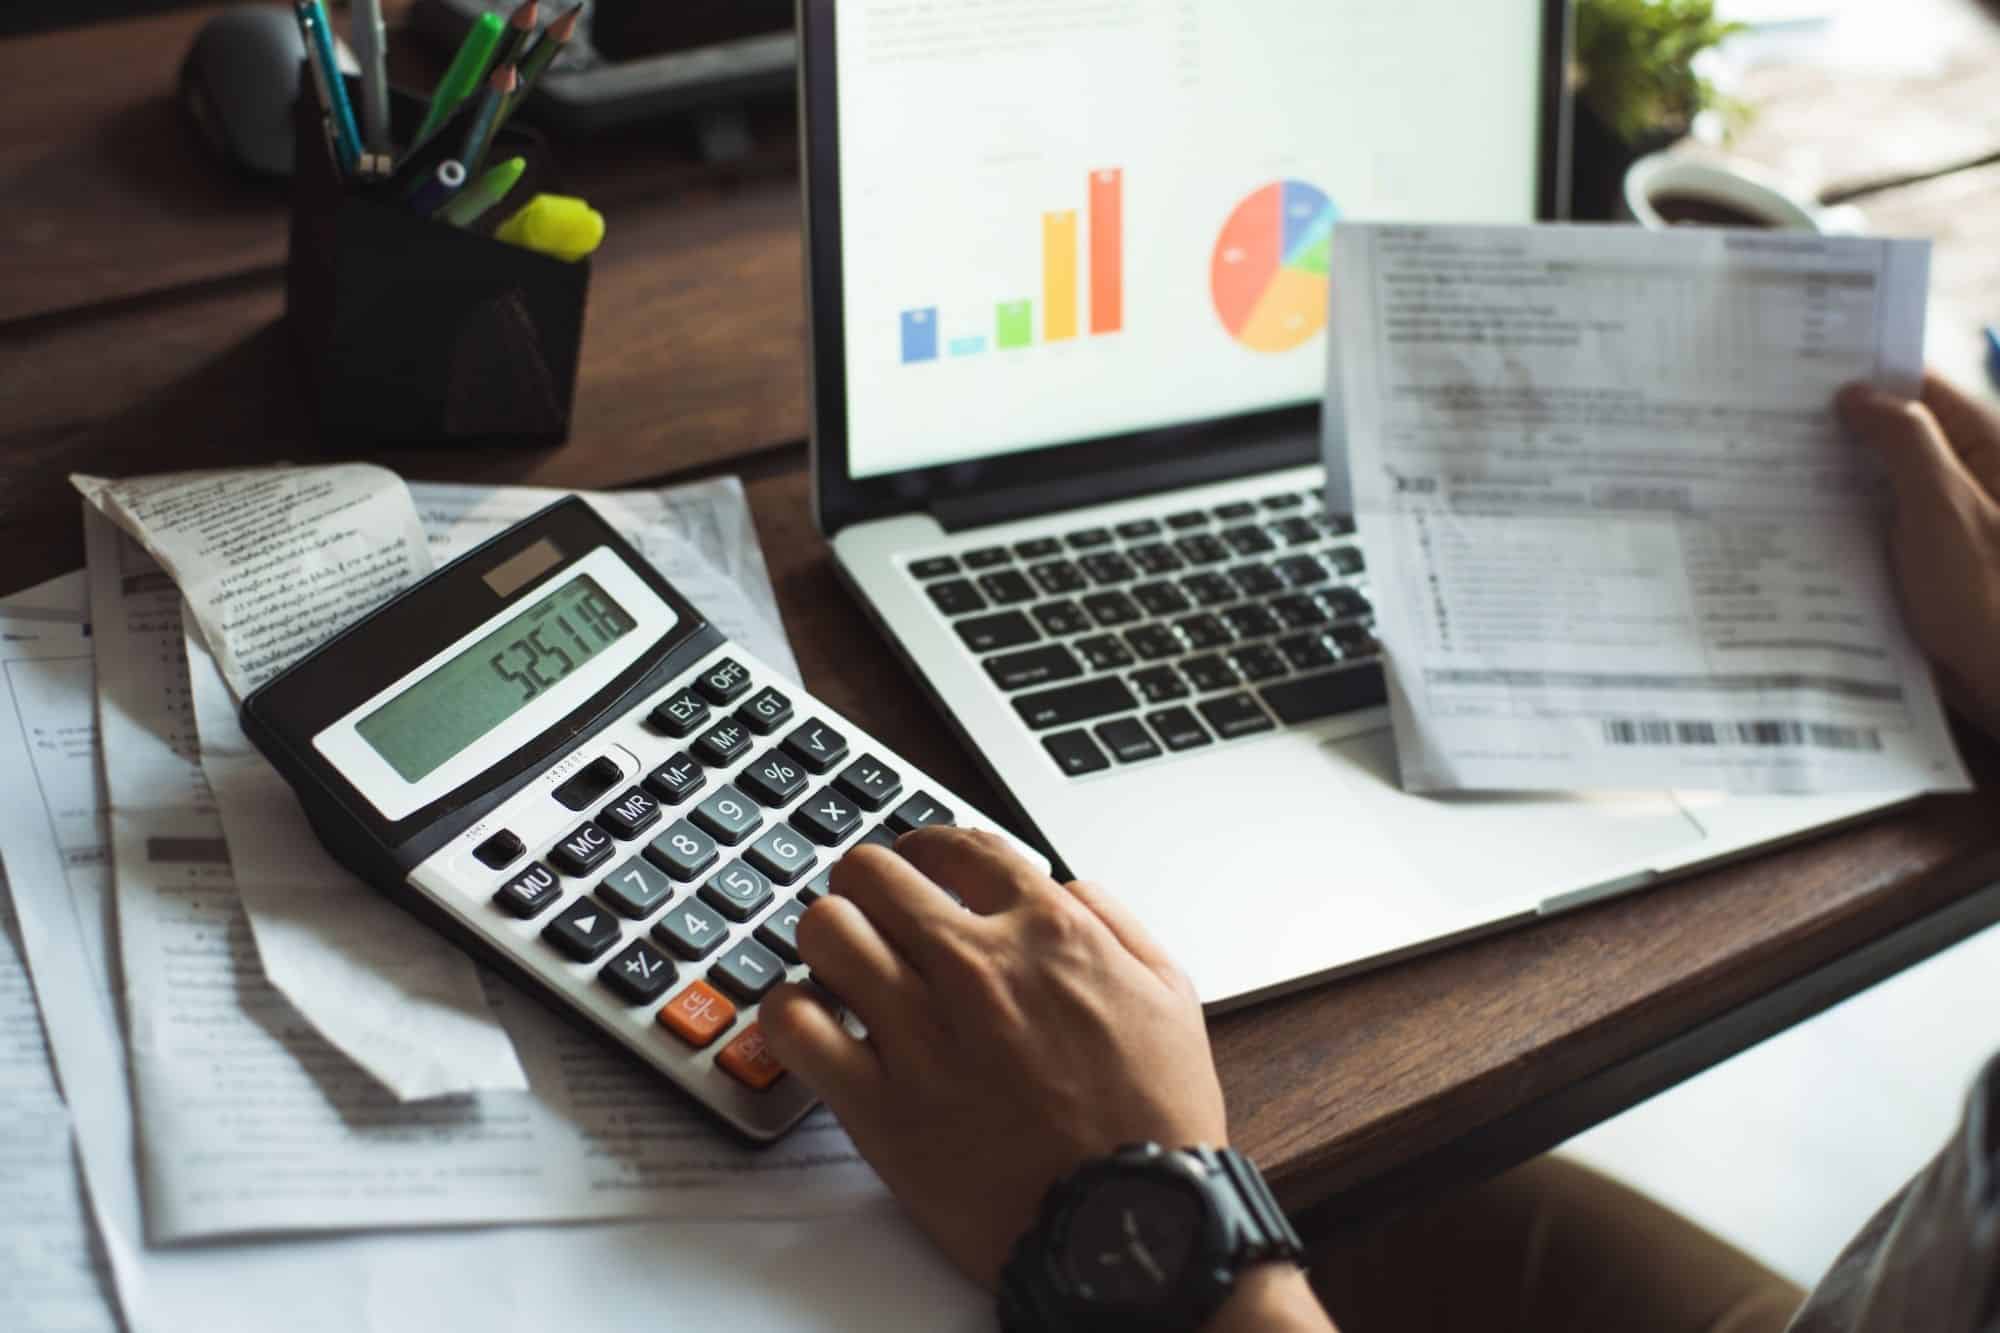 Company Services KL - We believe that by outsourcing your accounting functions, you will be able to concentrate on doing what you do best, which is running your business.